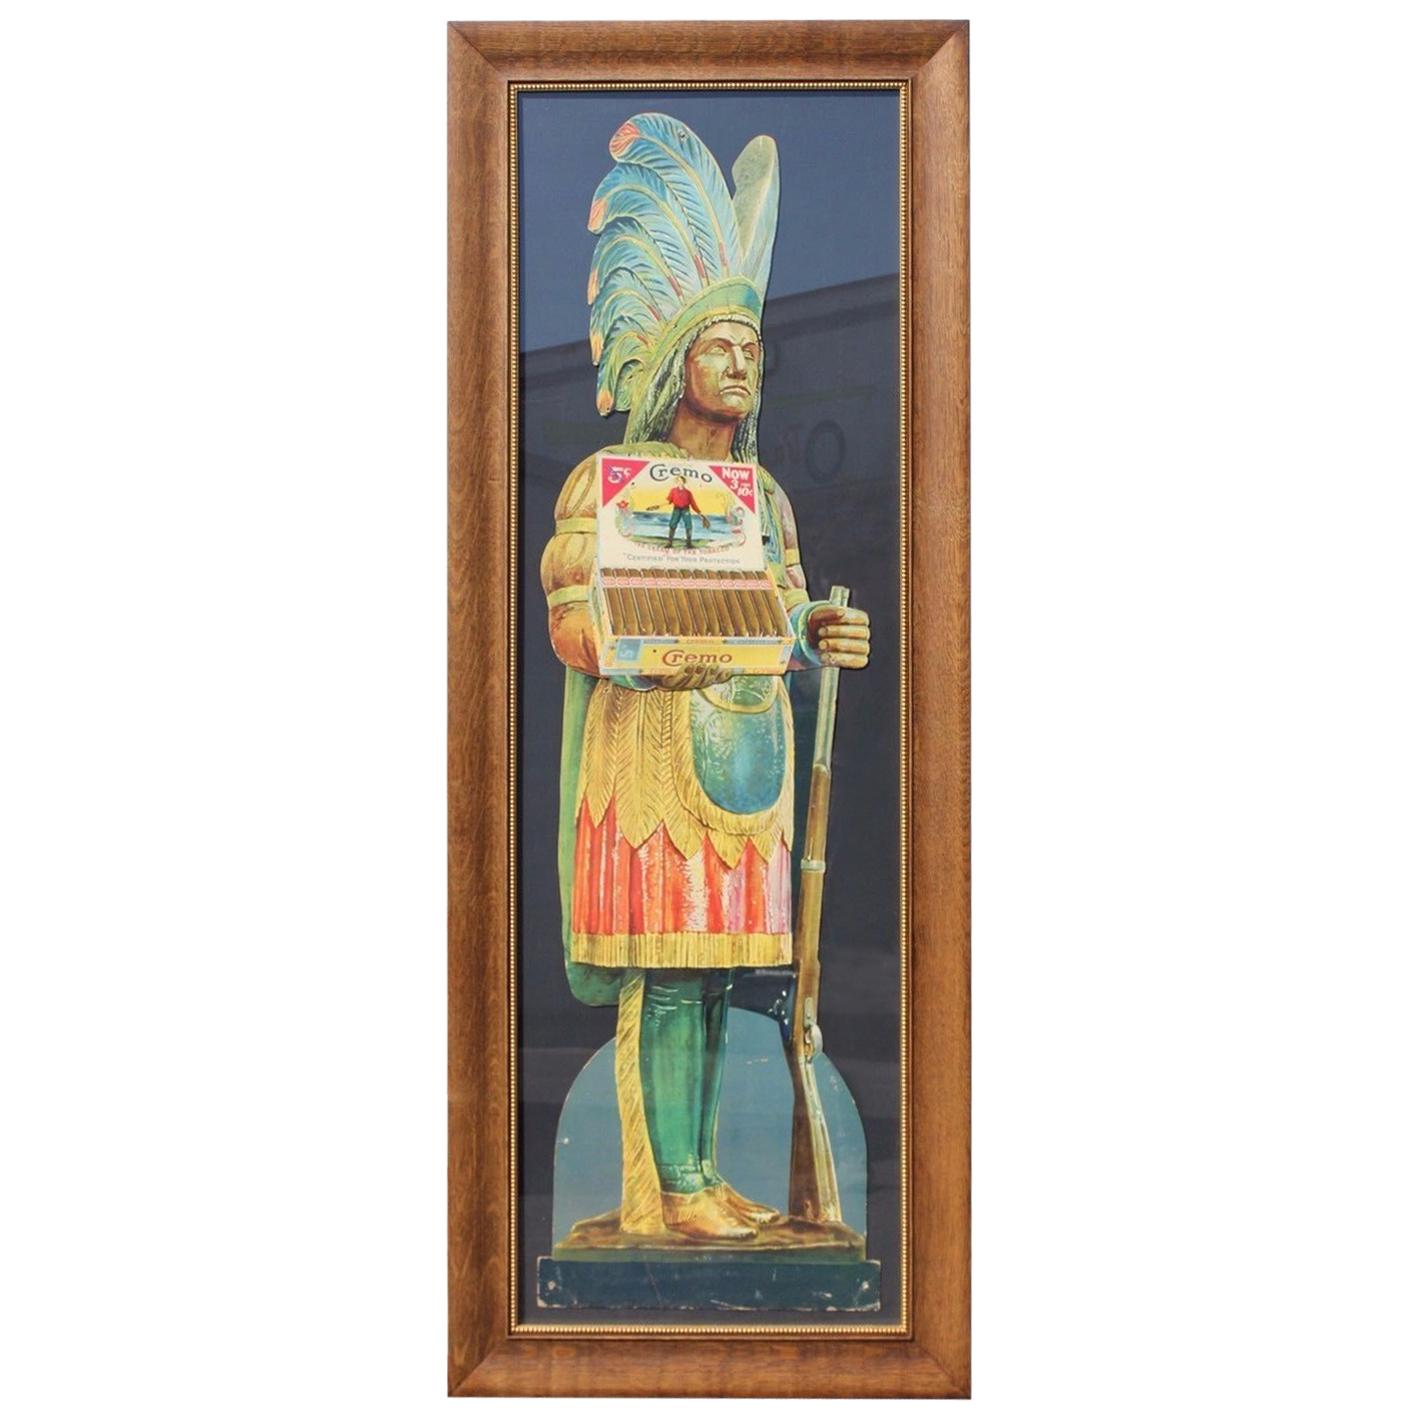 1920s-1930s Cremo Cigar Native American Framed Cardboard Ad For Sale